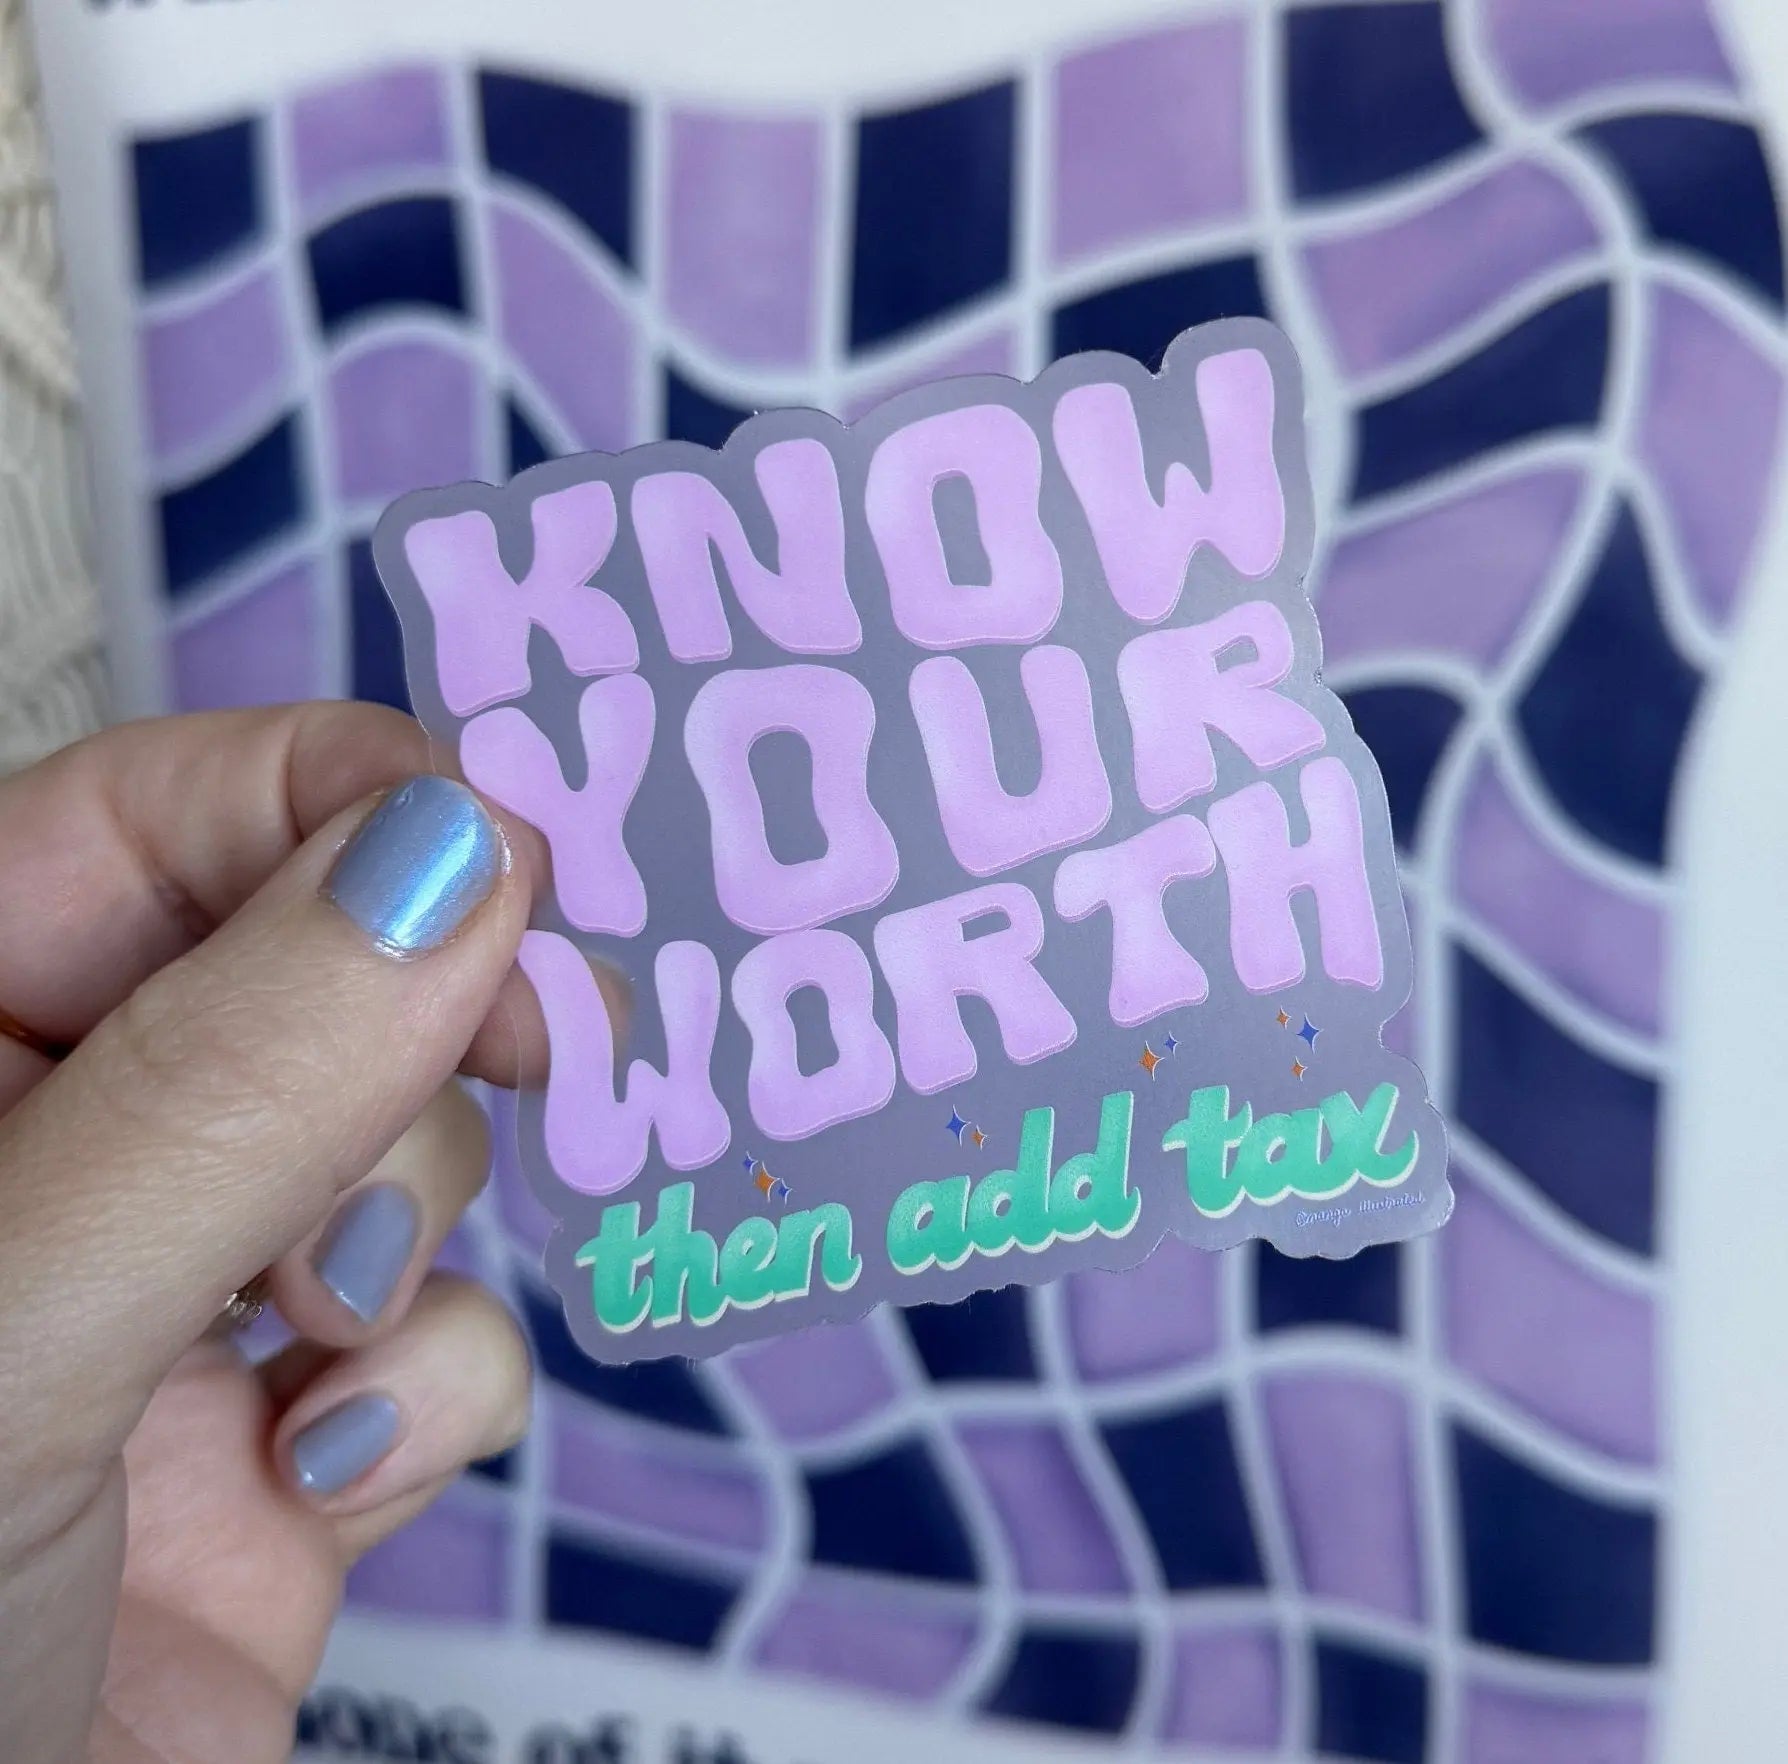 CLEAR Know your worth then add tax sticker MangoIllustrated